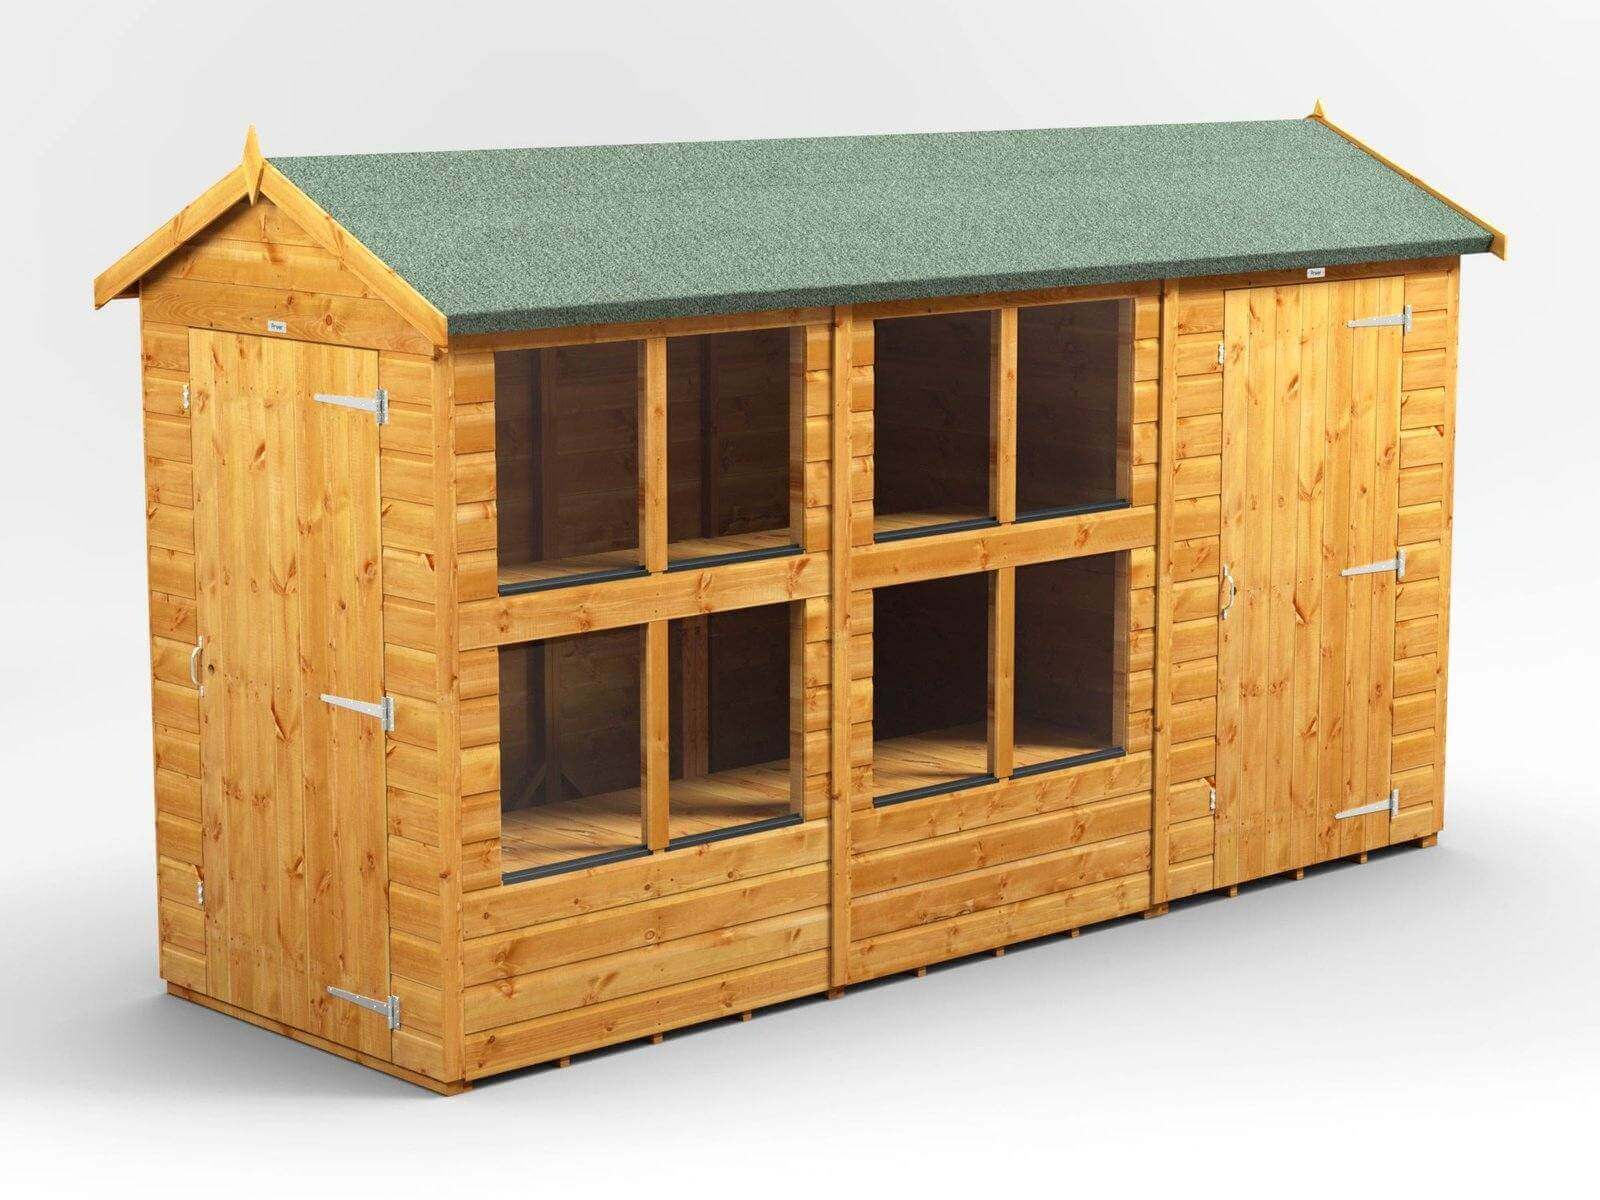 Power Apex Wooden Potting Shed Combi Various Sizes Shed Sizes: 12x4 (includes 4ft Side Store)